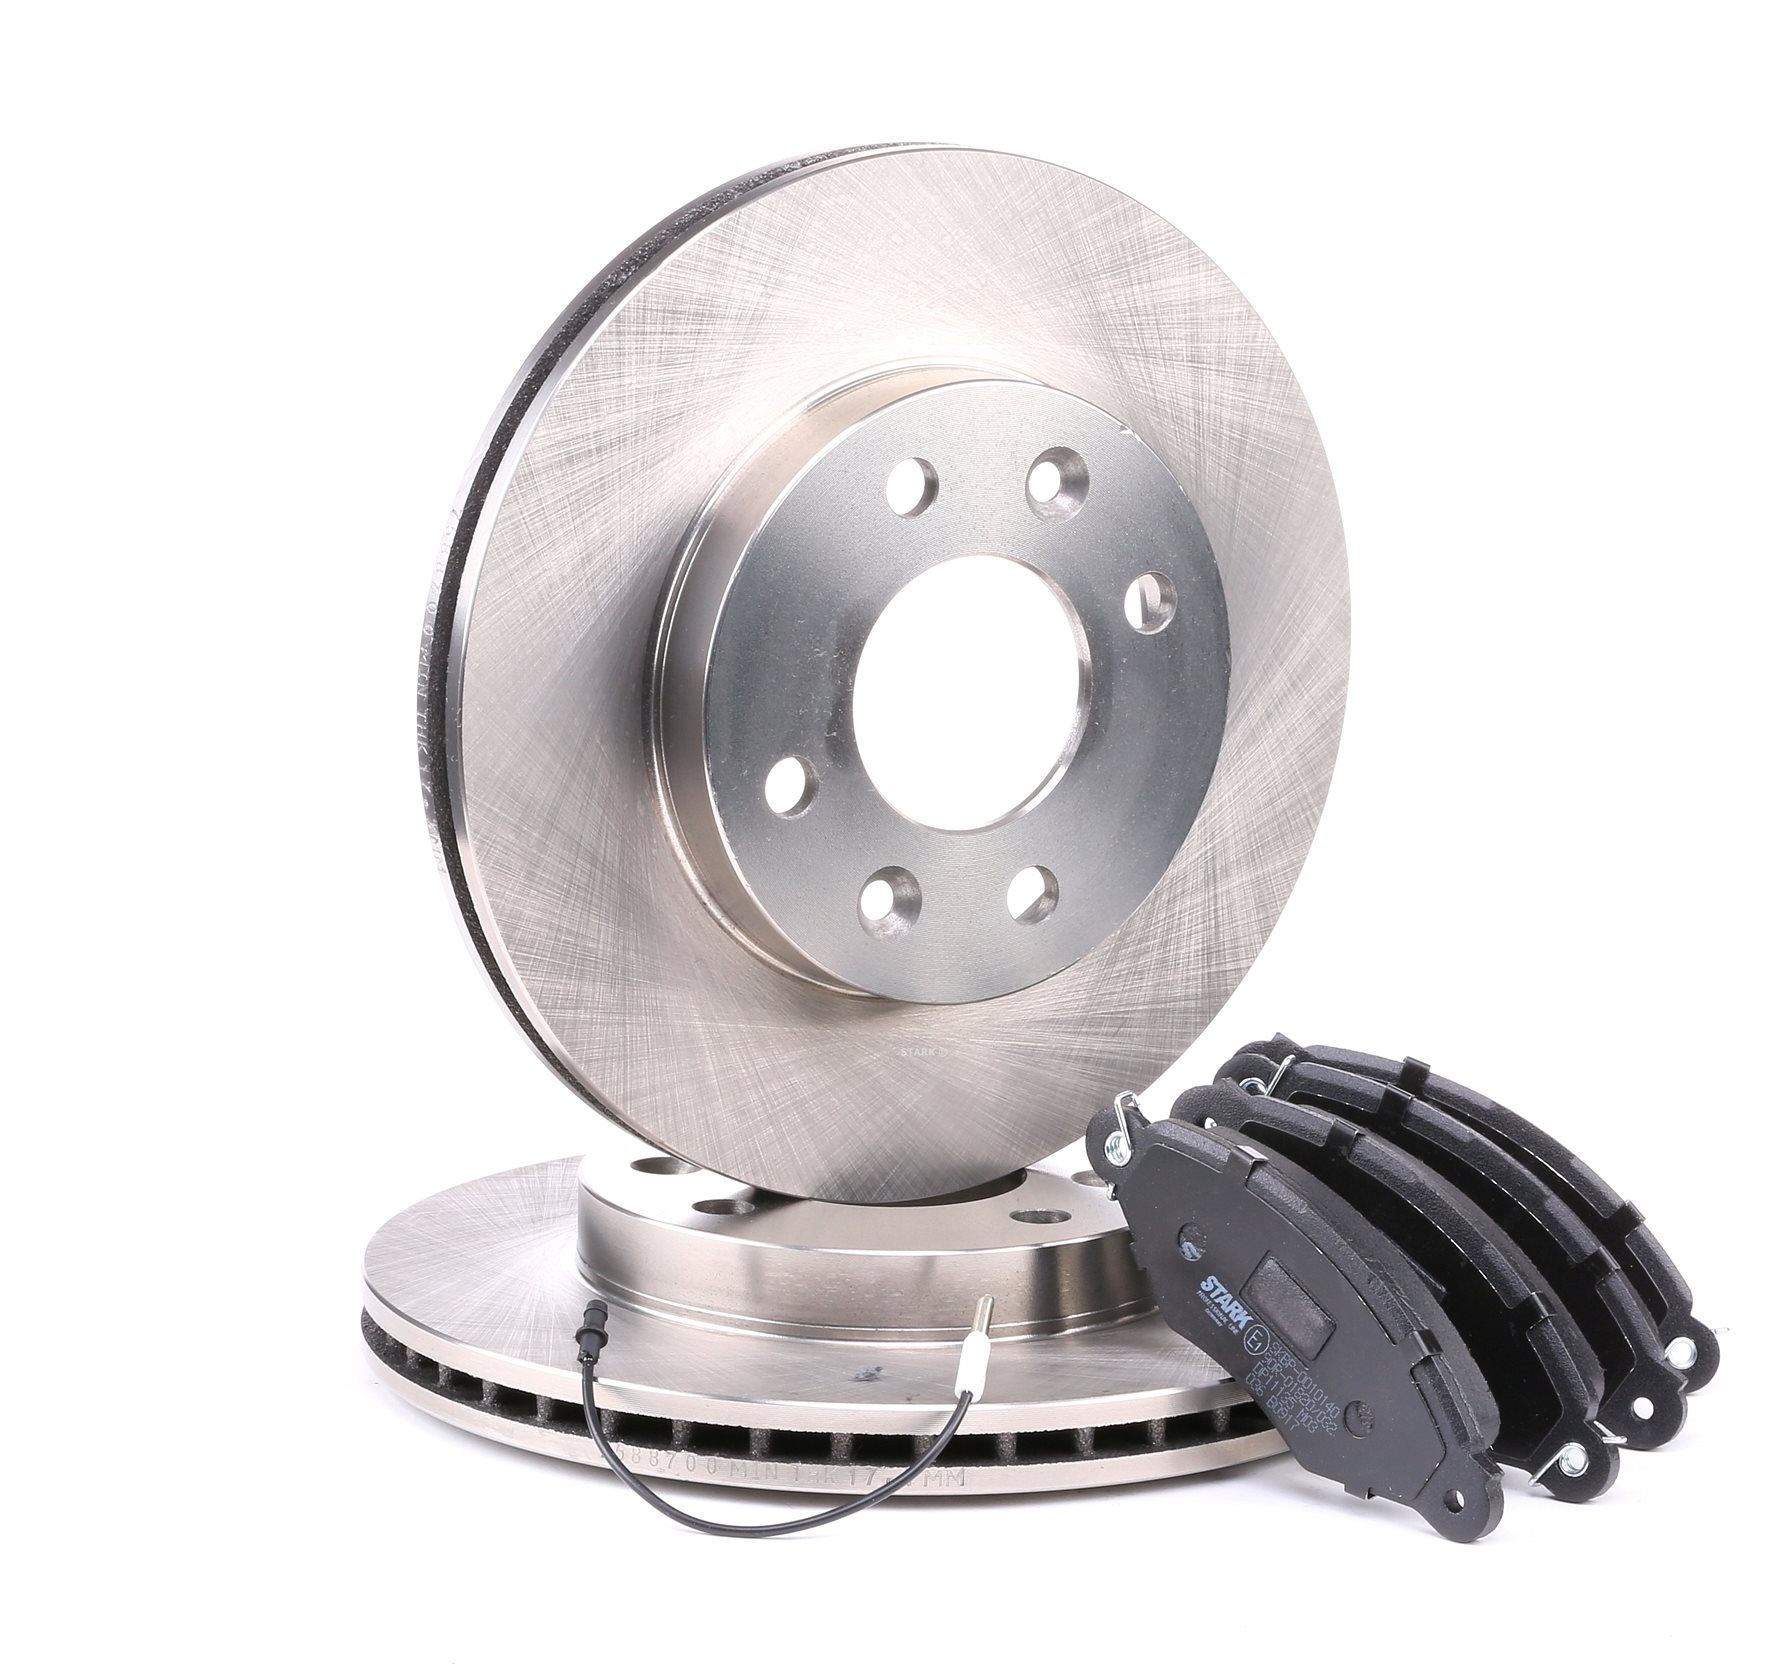 STARK SKBK-1090250 Brake discs and pads set Front Axle, Vented, incl. wear warning contact